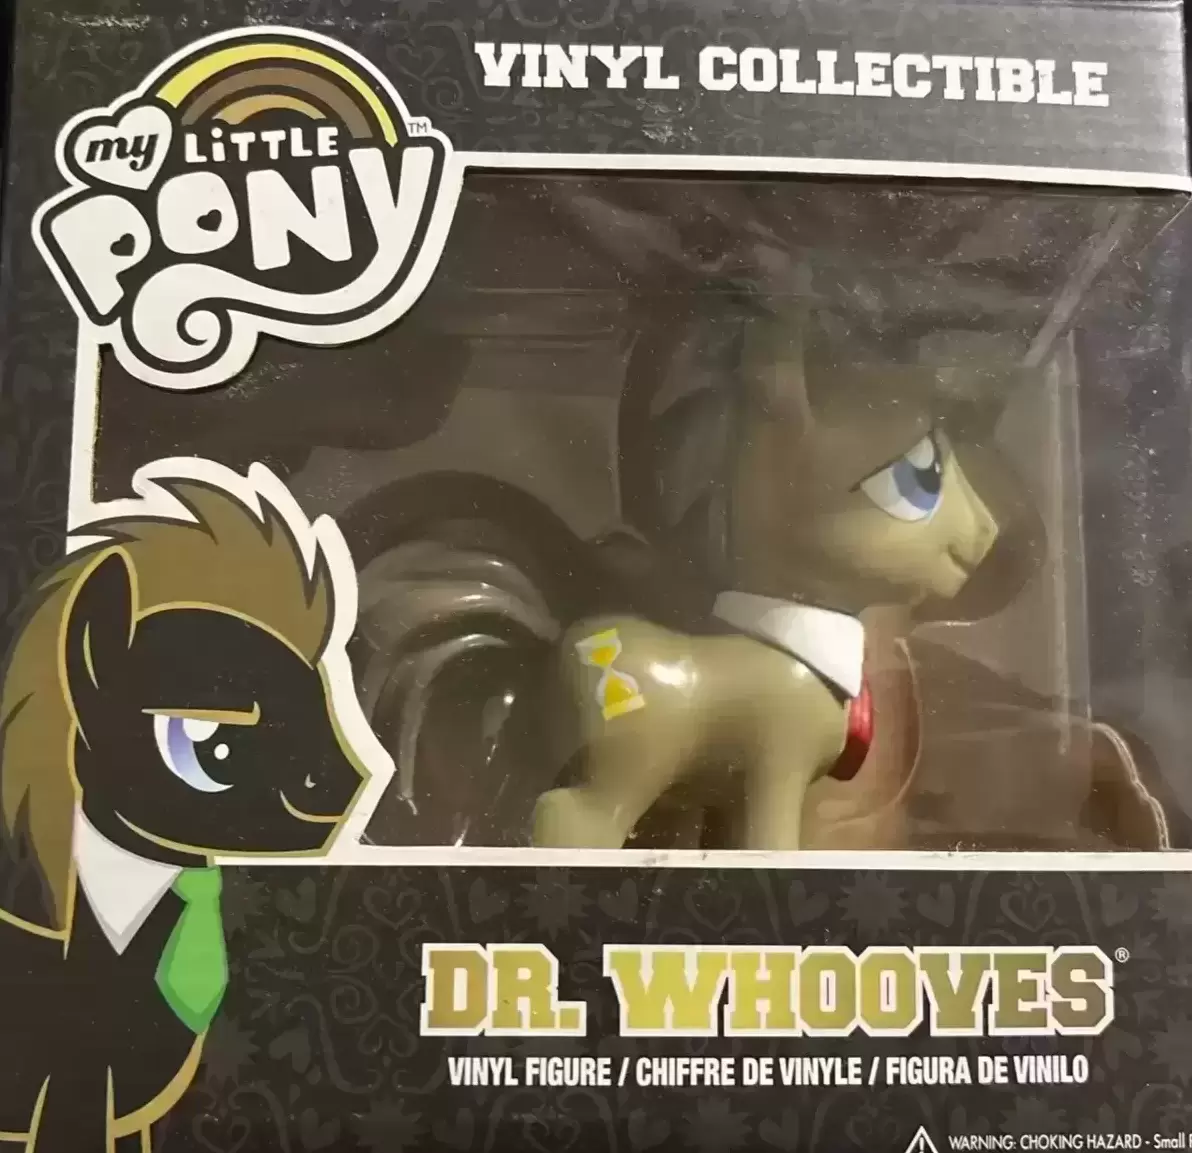 Vinyl Collectible - My Little Pony - Dr. Whooves